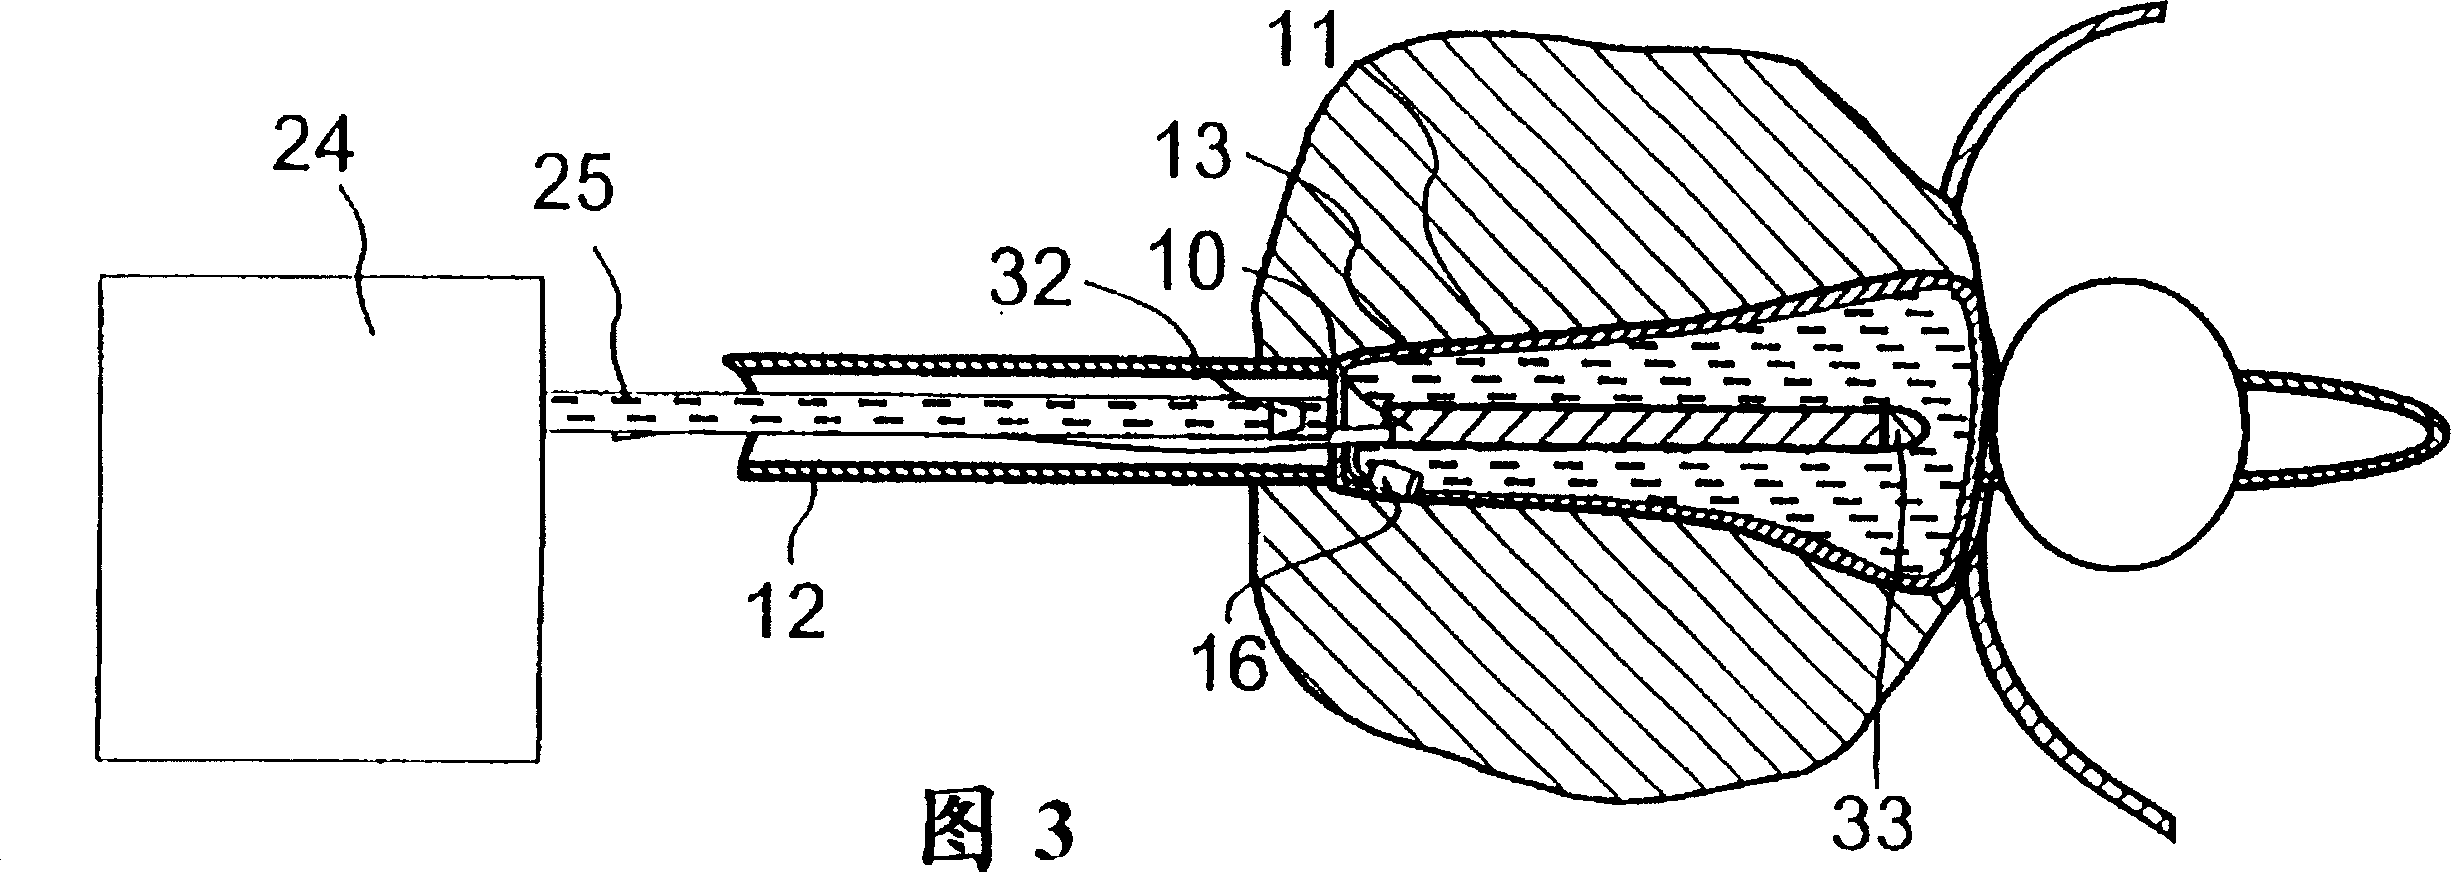 Device for local heat treatment of tissue